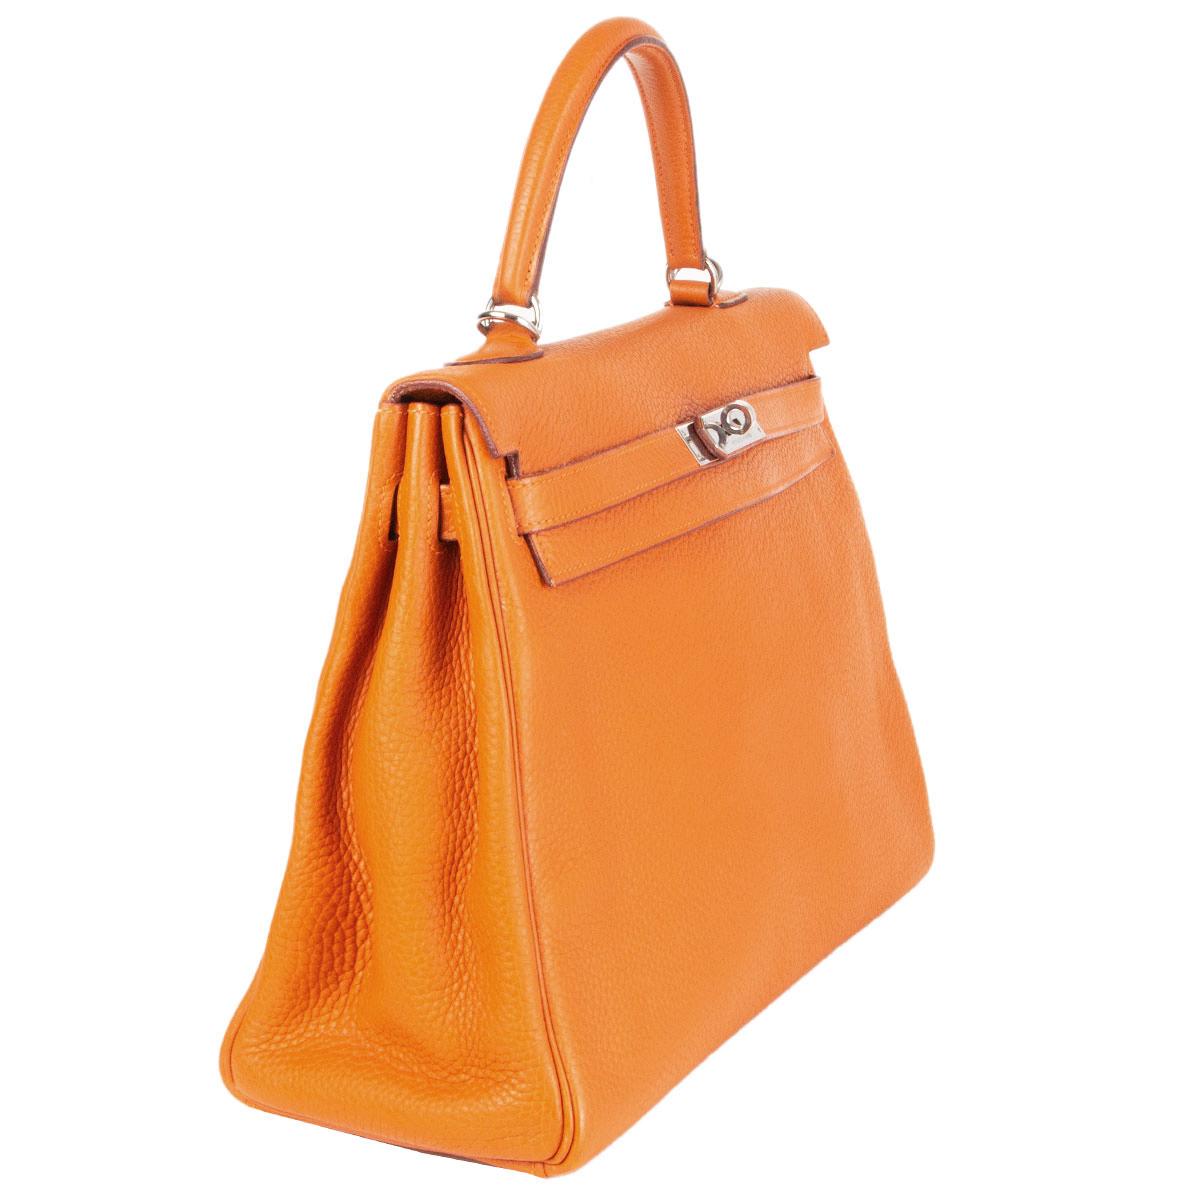 100% authentic Hermès 'Kelly 35 Retourne' bag in Portion (pumpkin orange) Taurillon Clemence leather with palladium hardware. Lined in Potiron goat skin leather with two open pockets against the front and a zipper pocket against the back. Has been